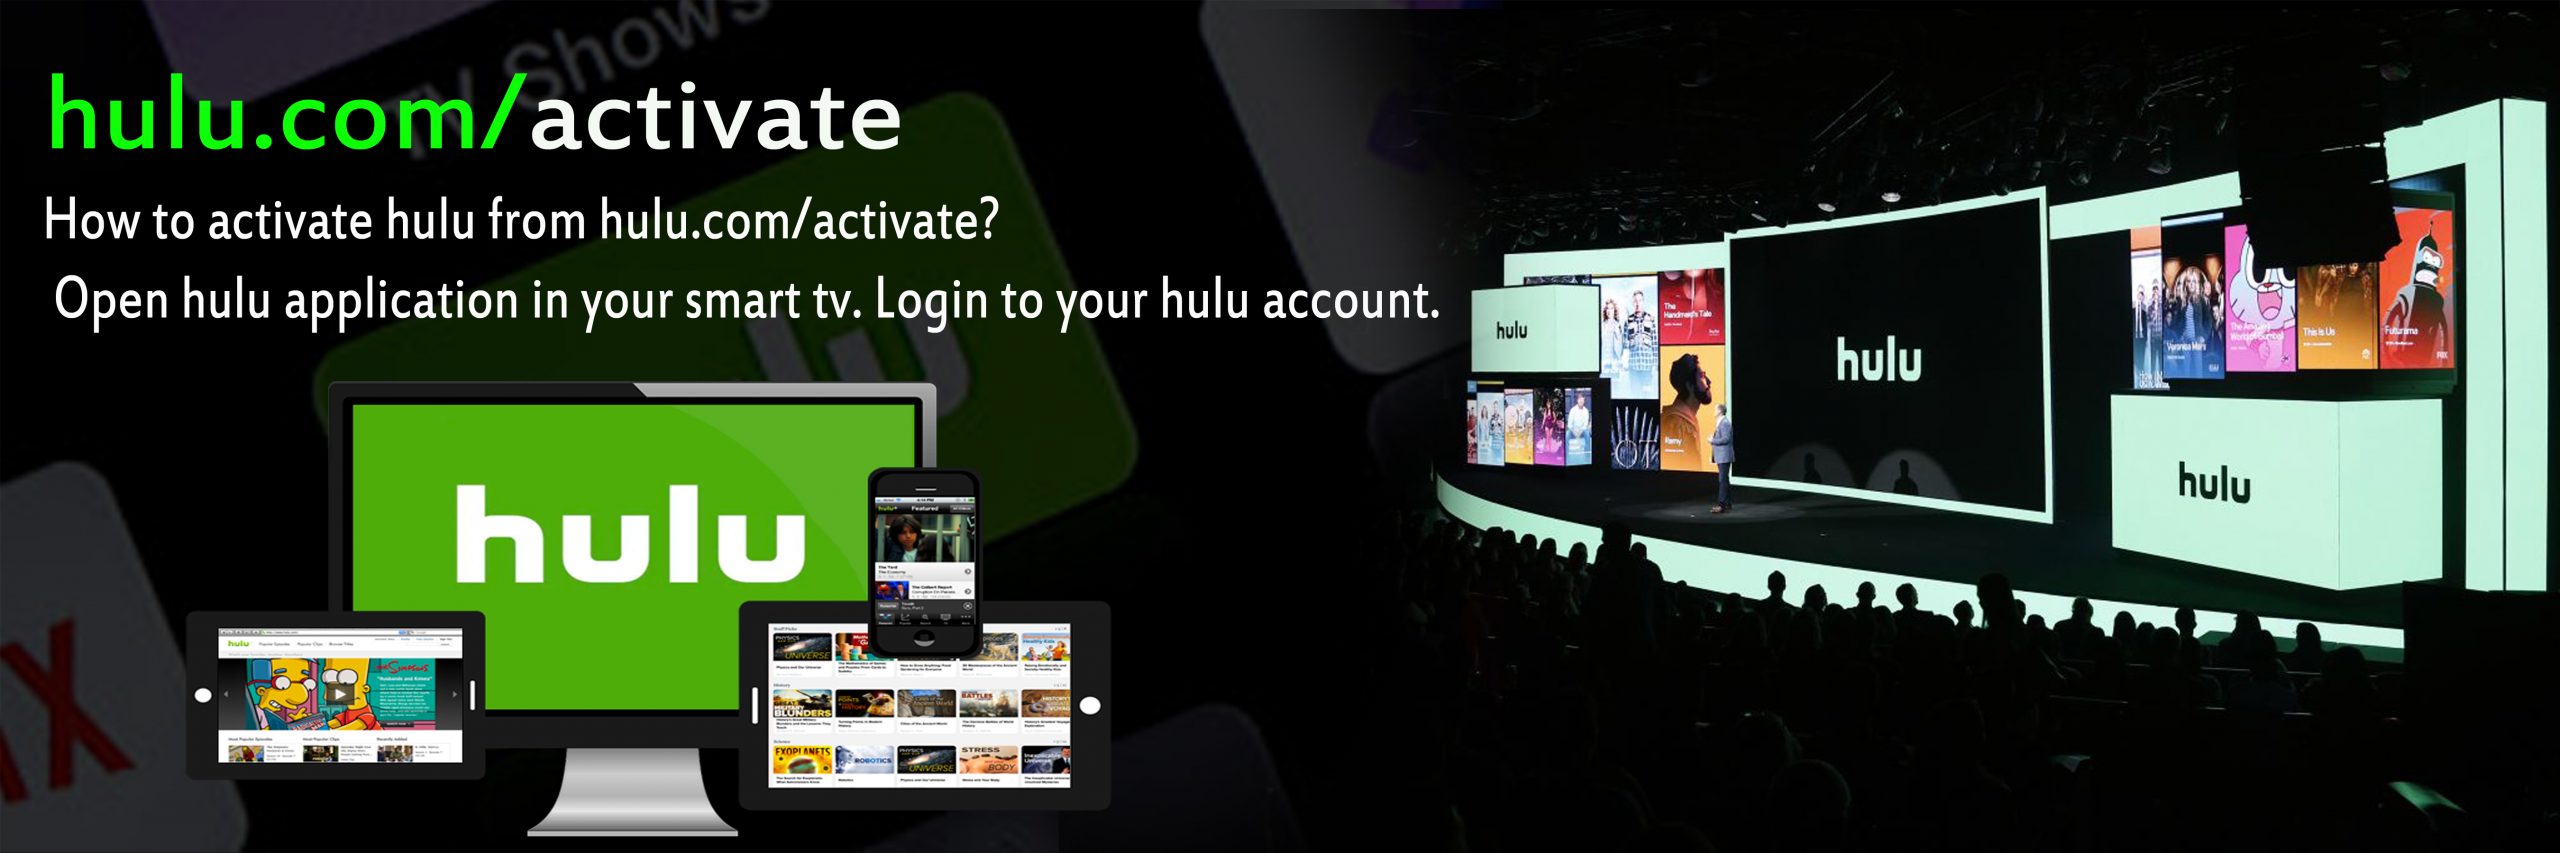 hulu.com/activate | Enter Code From TV To Activate and watch Hulu